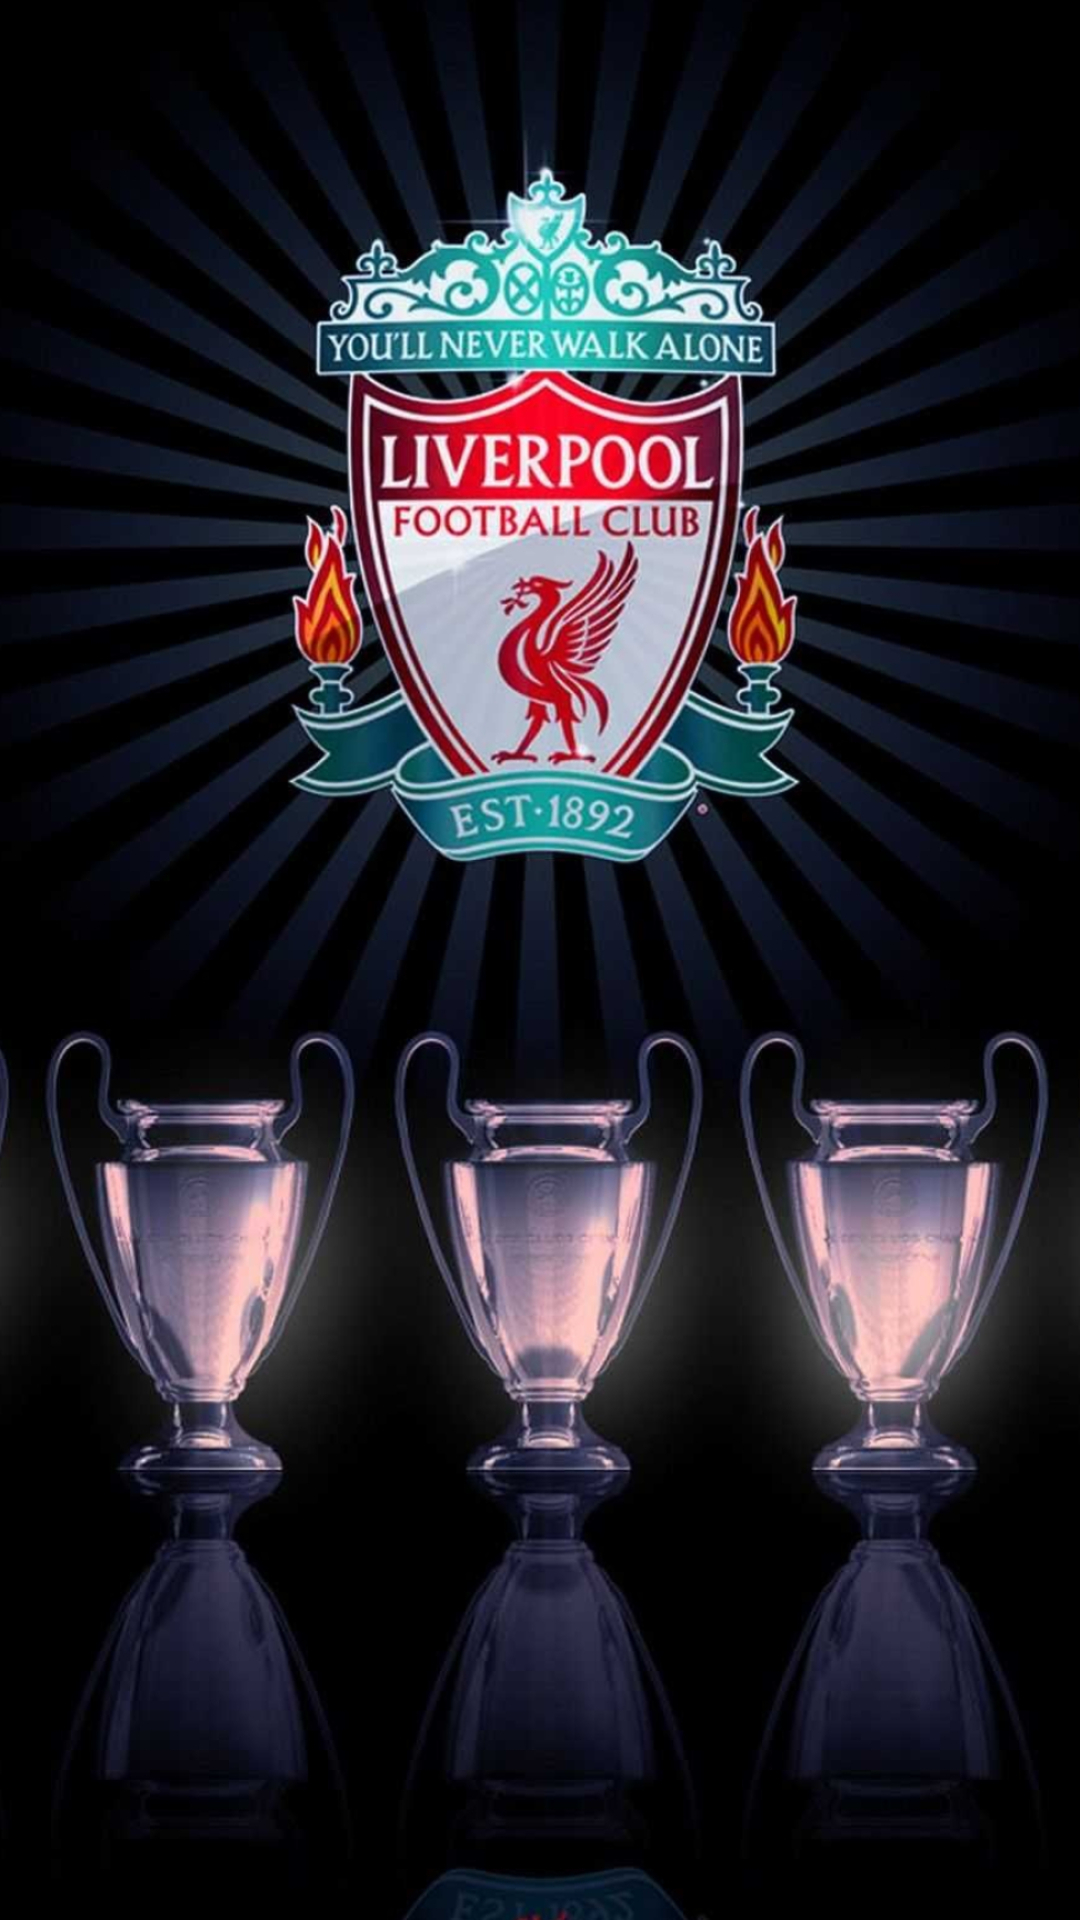 Liverpool FC, Football passion, Club heritage, Anfield legacy, 1080x1920 Full HD Phone